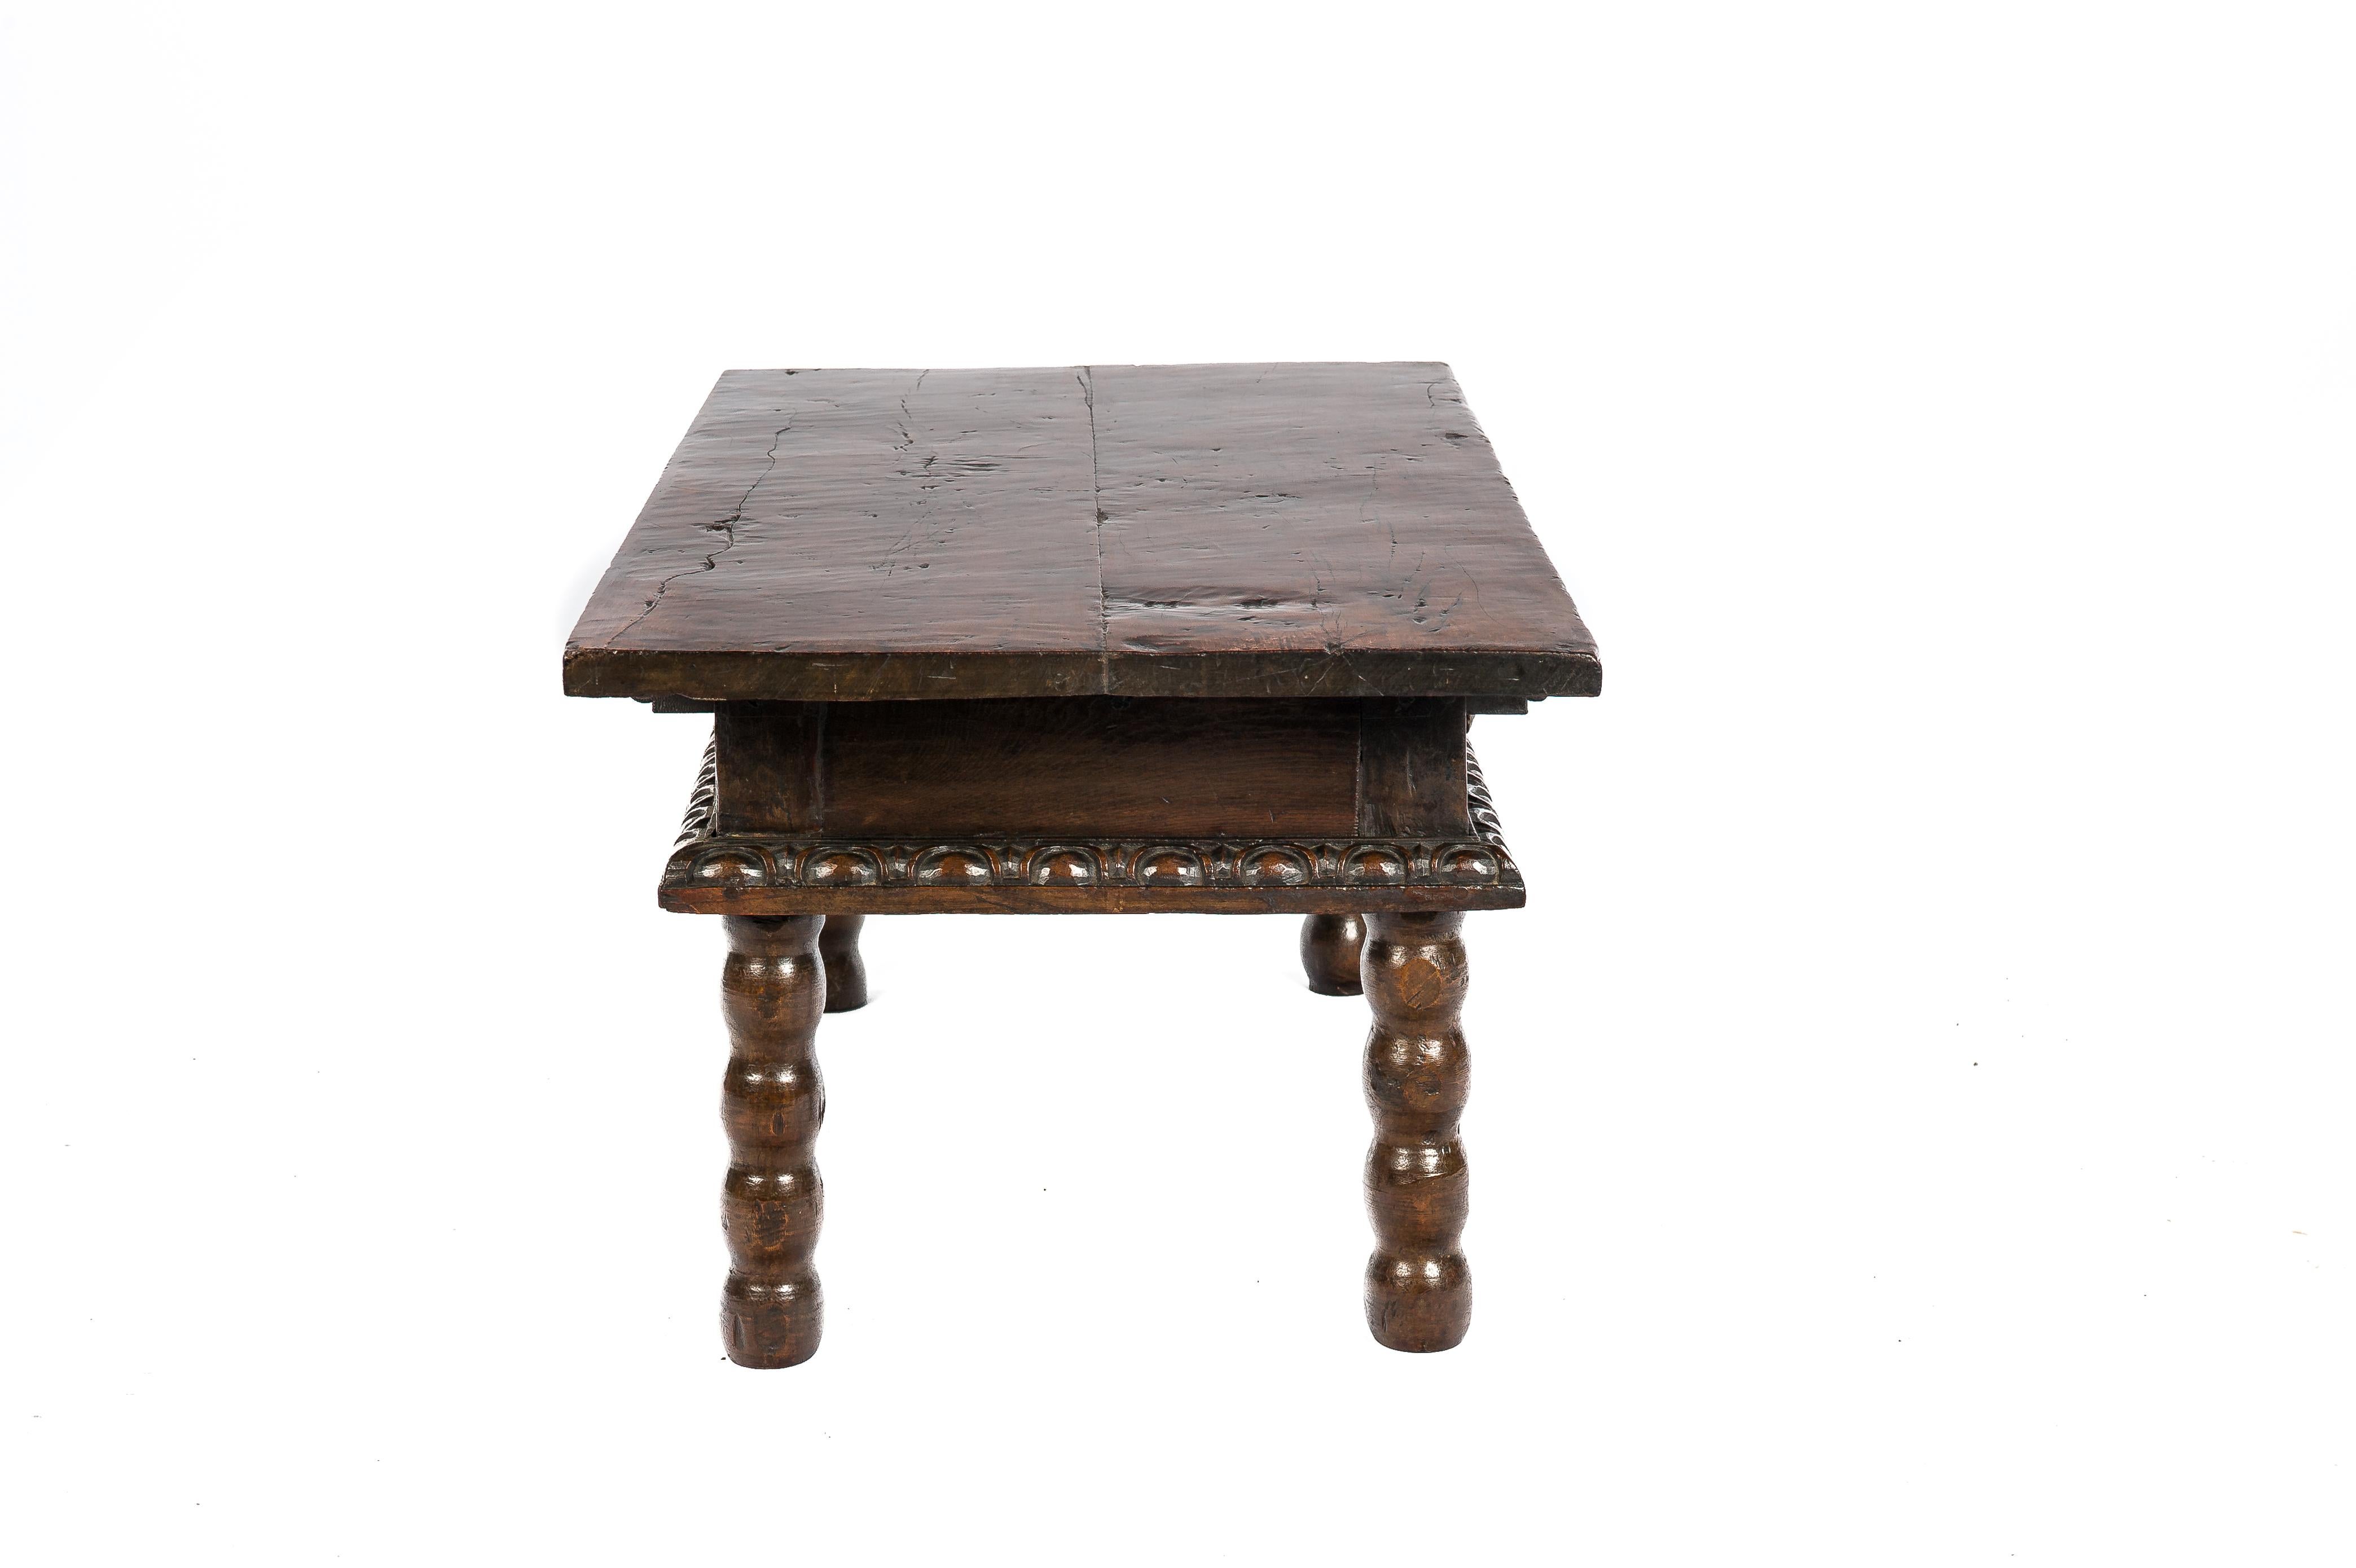 Forged Antique 17th Century Baroque Spanish Walnut  Rustic Two Drawers Coffee Table